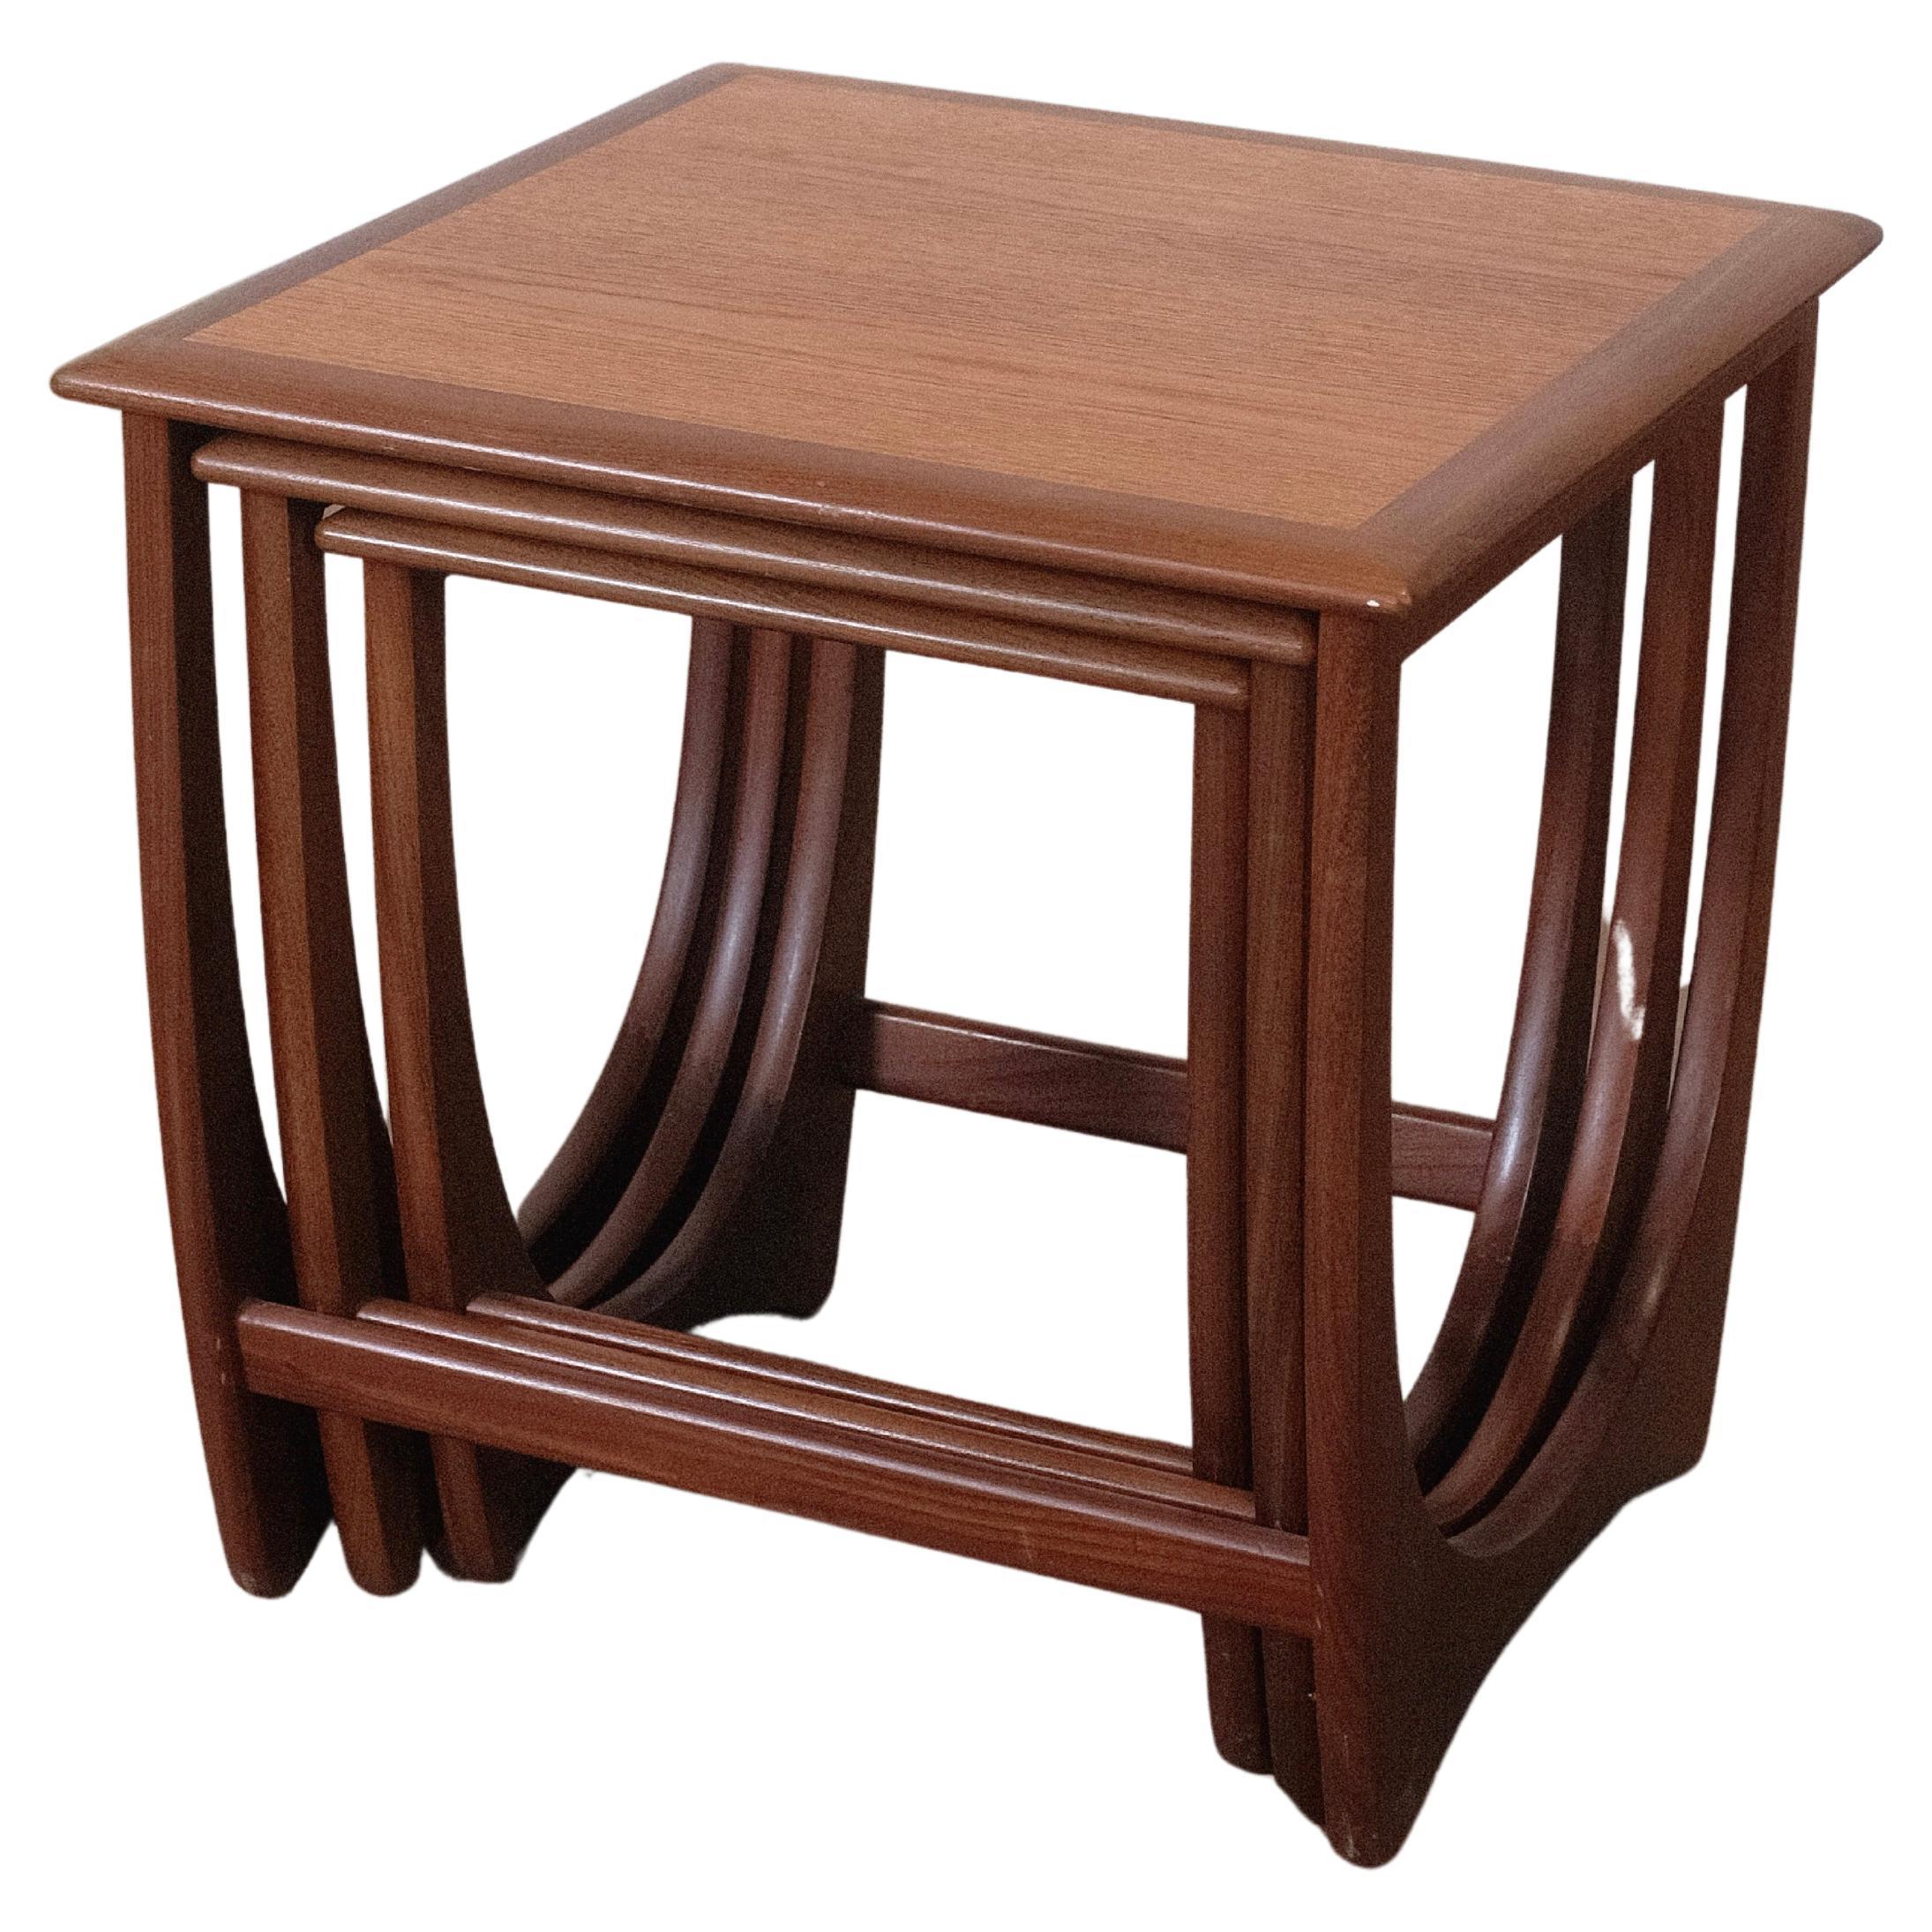 Mid-Century Modern Teak "Astro" Nesting Tables by G Plan For Sale